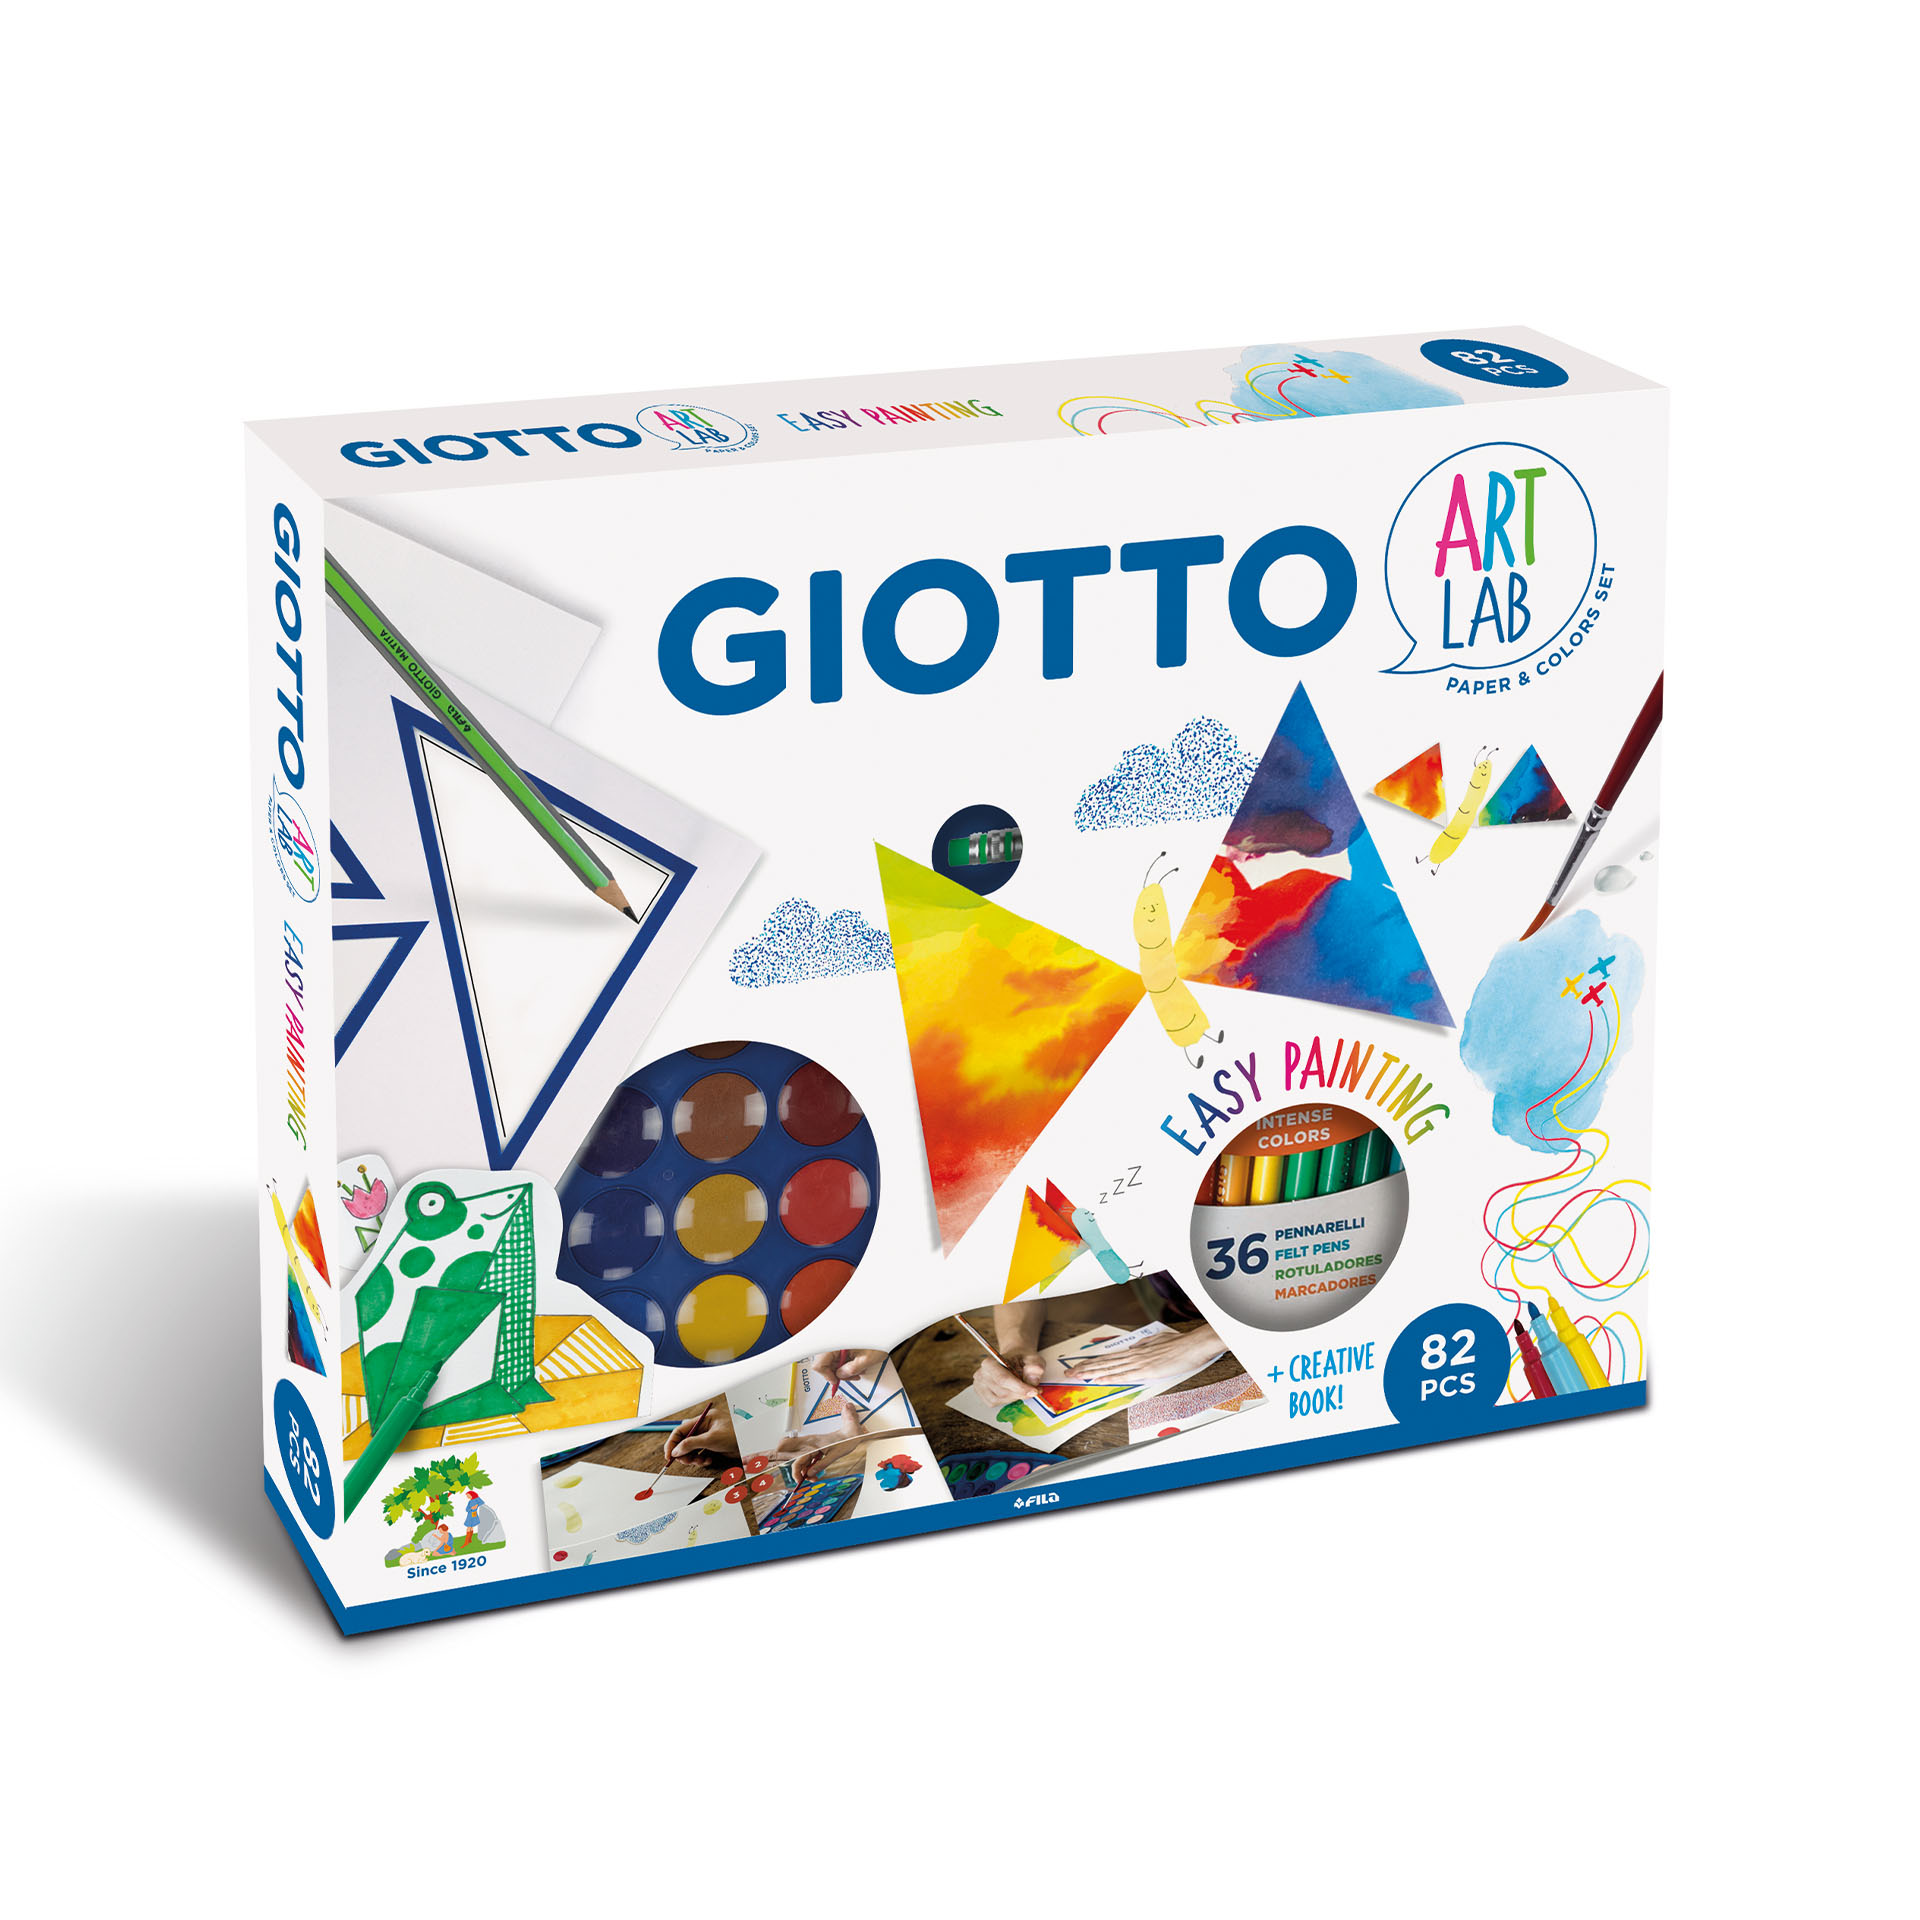 Giotto Art Lab Easy Painting, , large